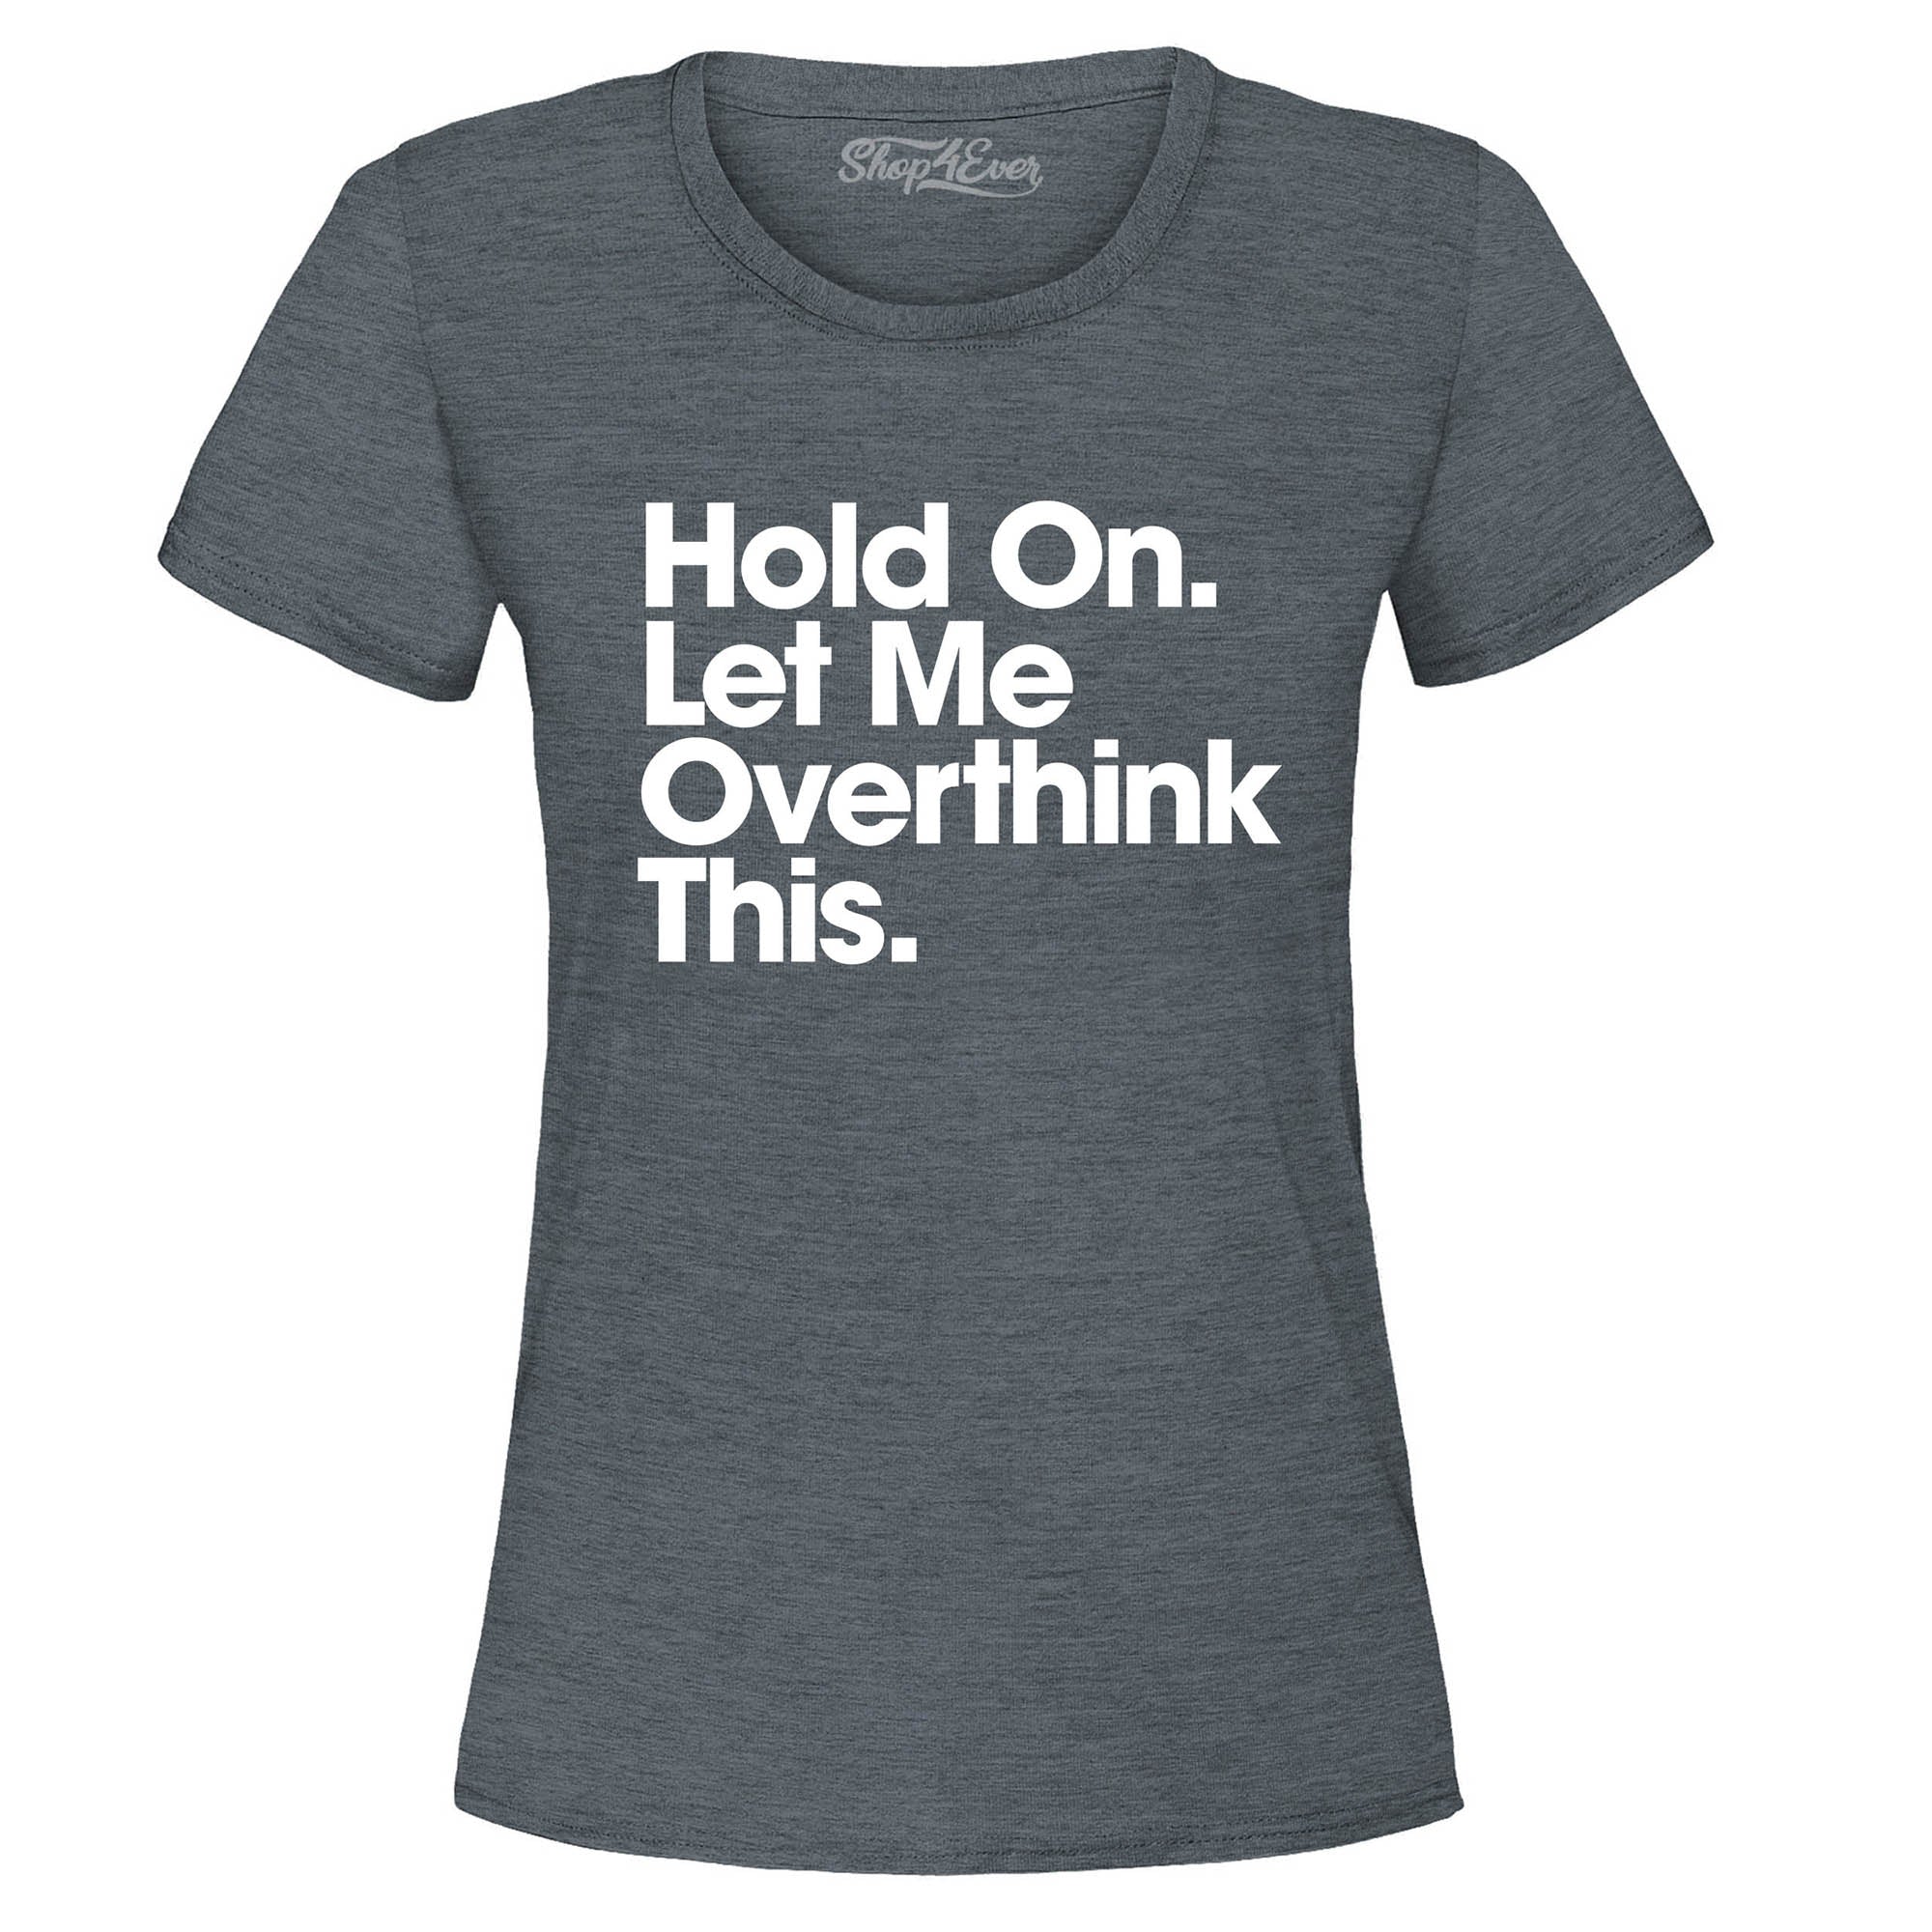 Hold On. Let Me Overthink This. Women's T-Shirt